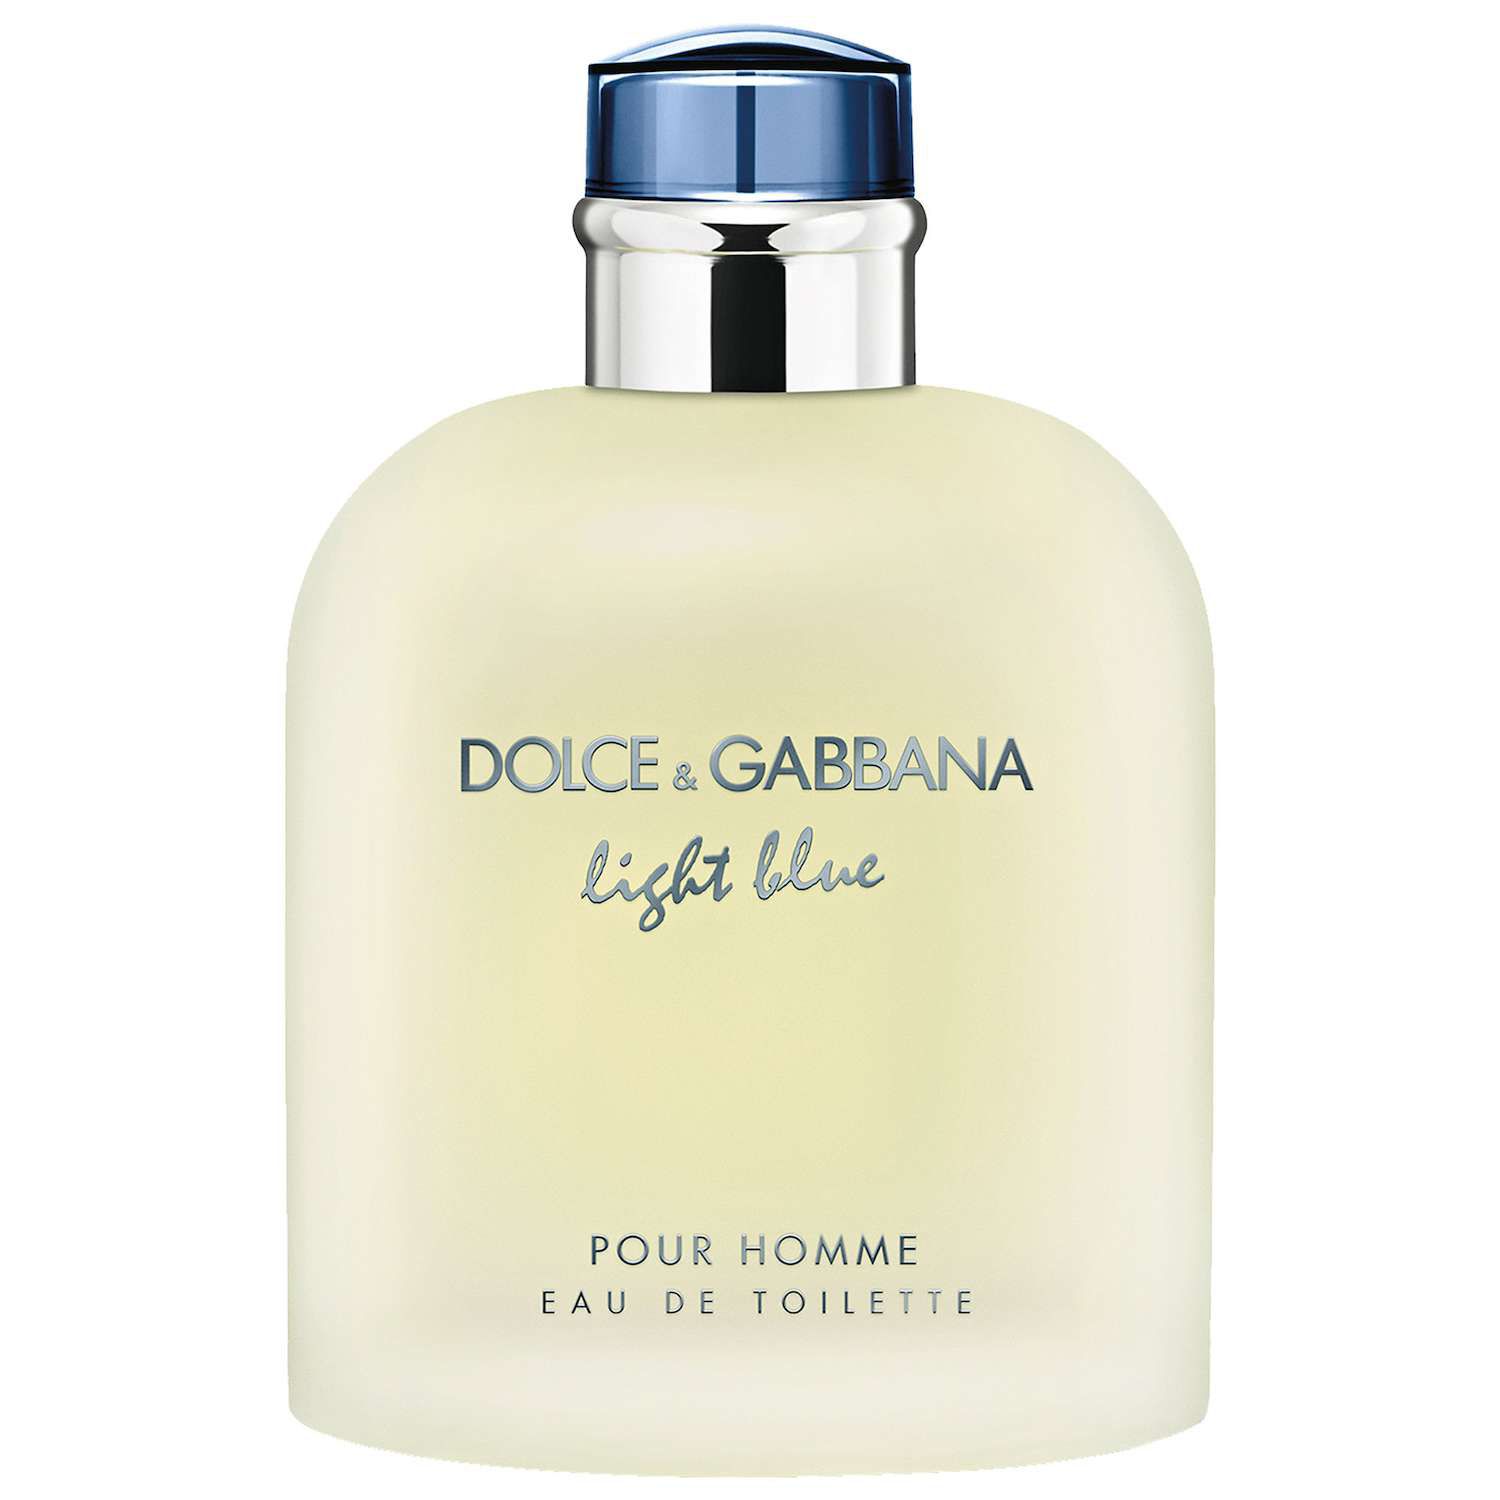 dolce and gabbana light blue review